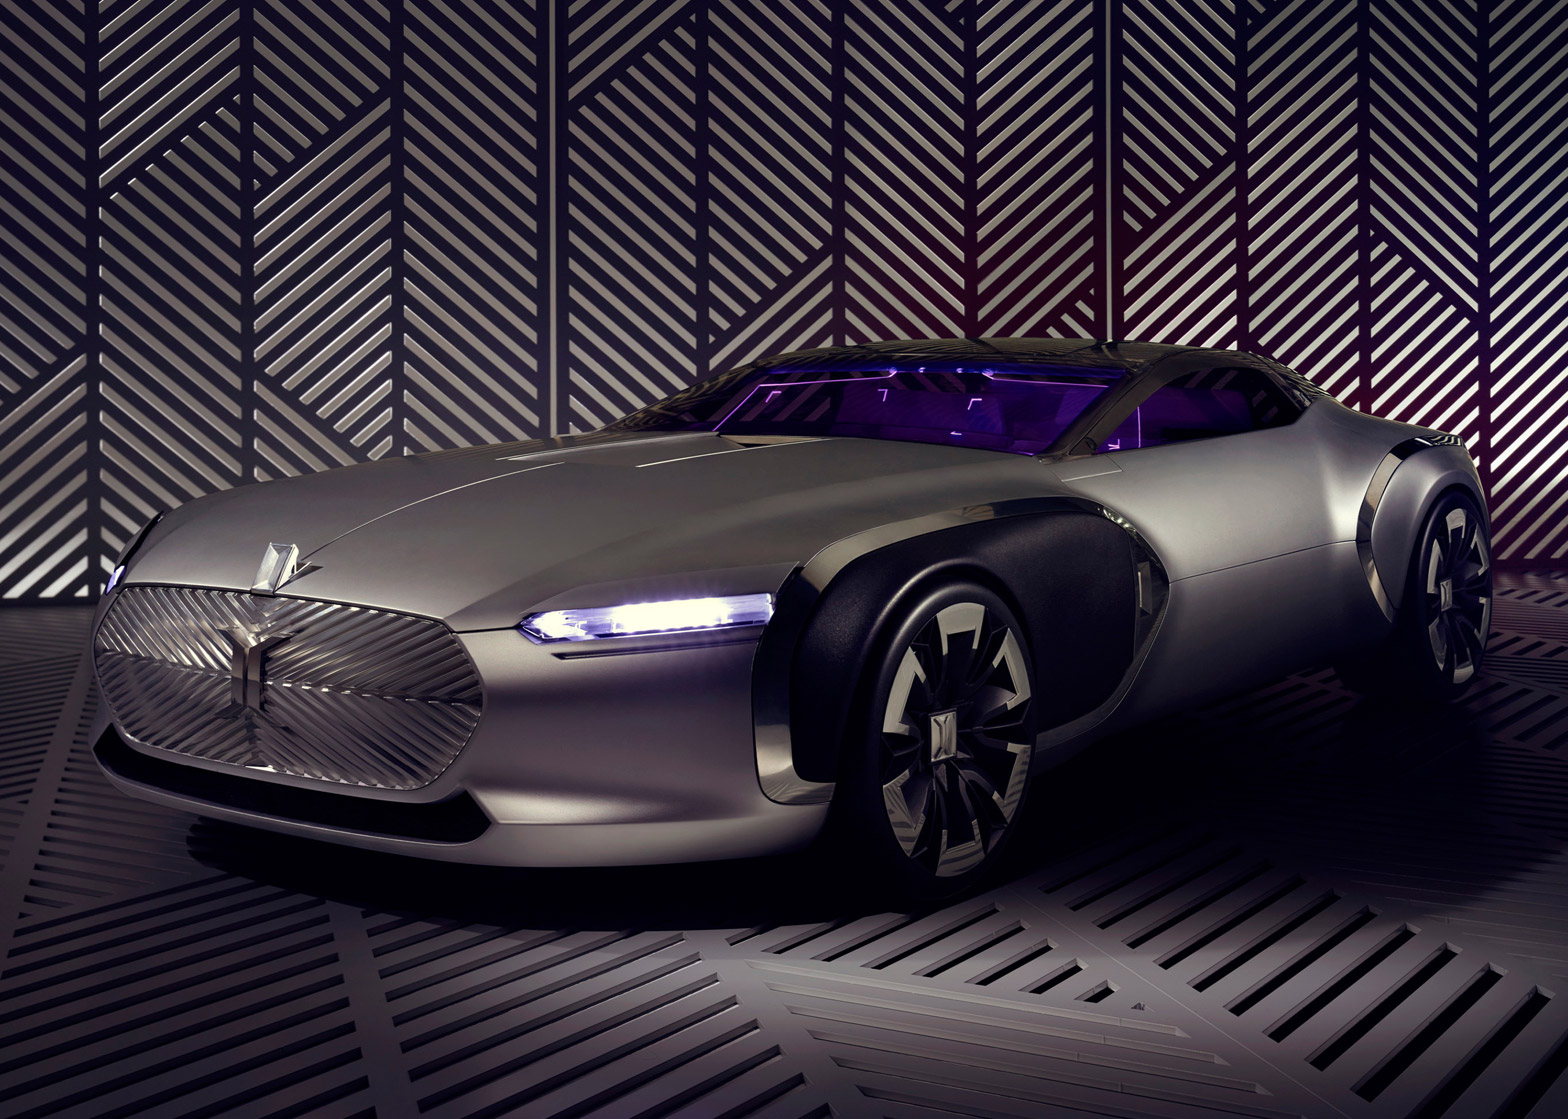 Renault S Concept Car Marks Anniversary Of Le Corbusier S Death